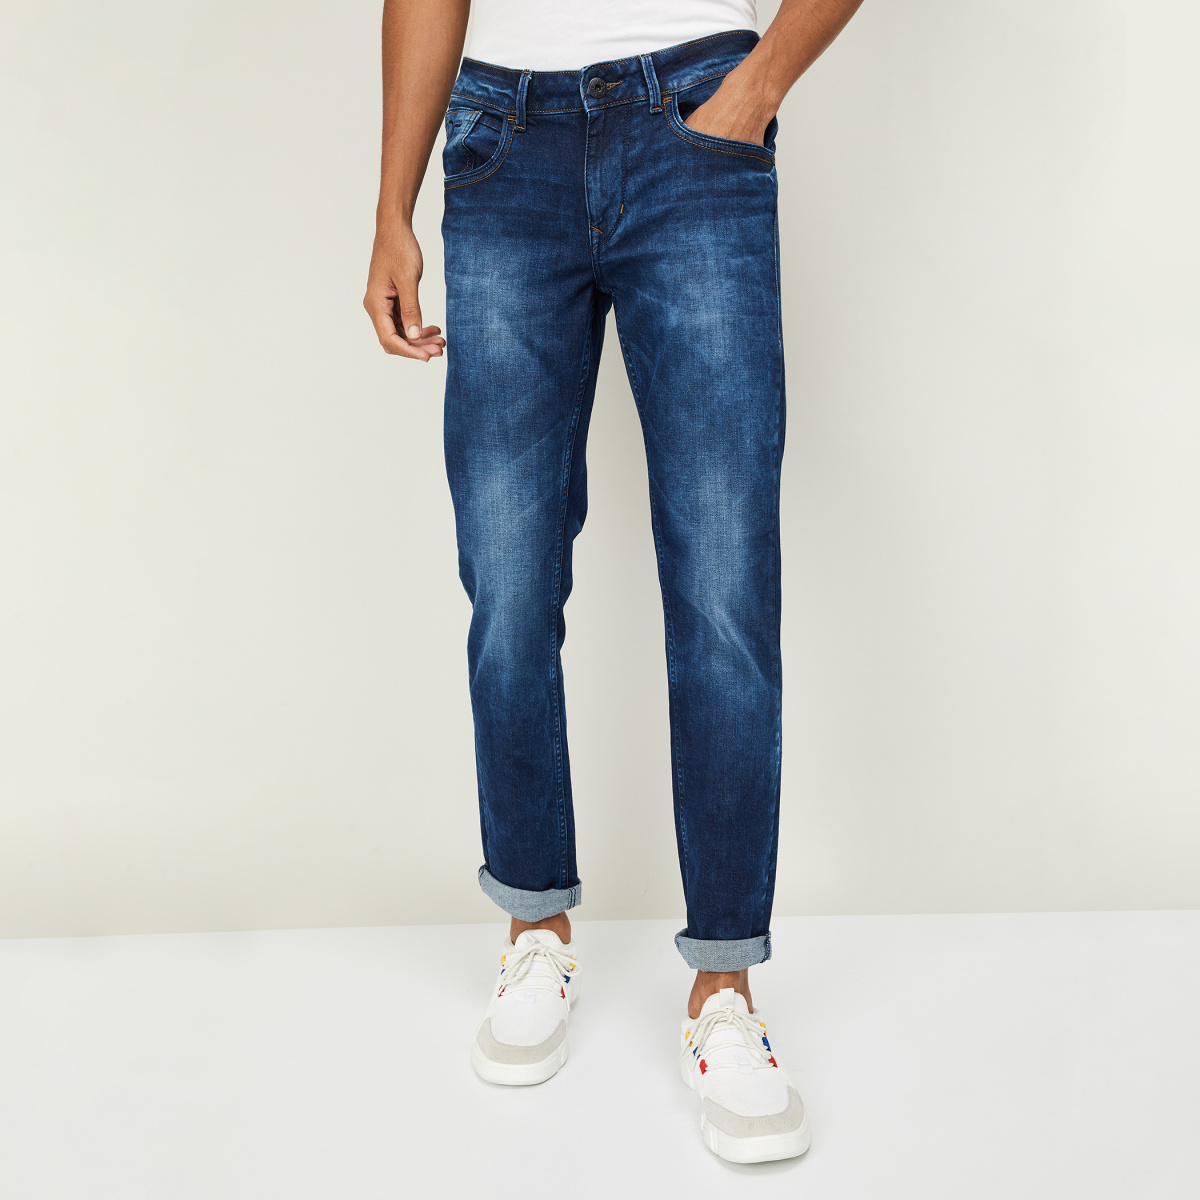 FLYING MACHINE Men Washed Skinny Fit Jeans